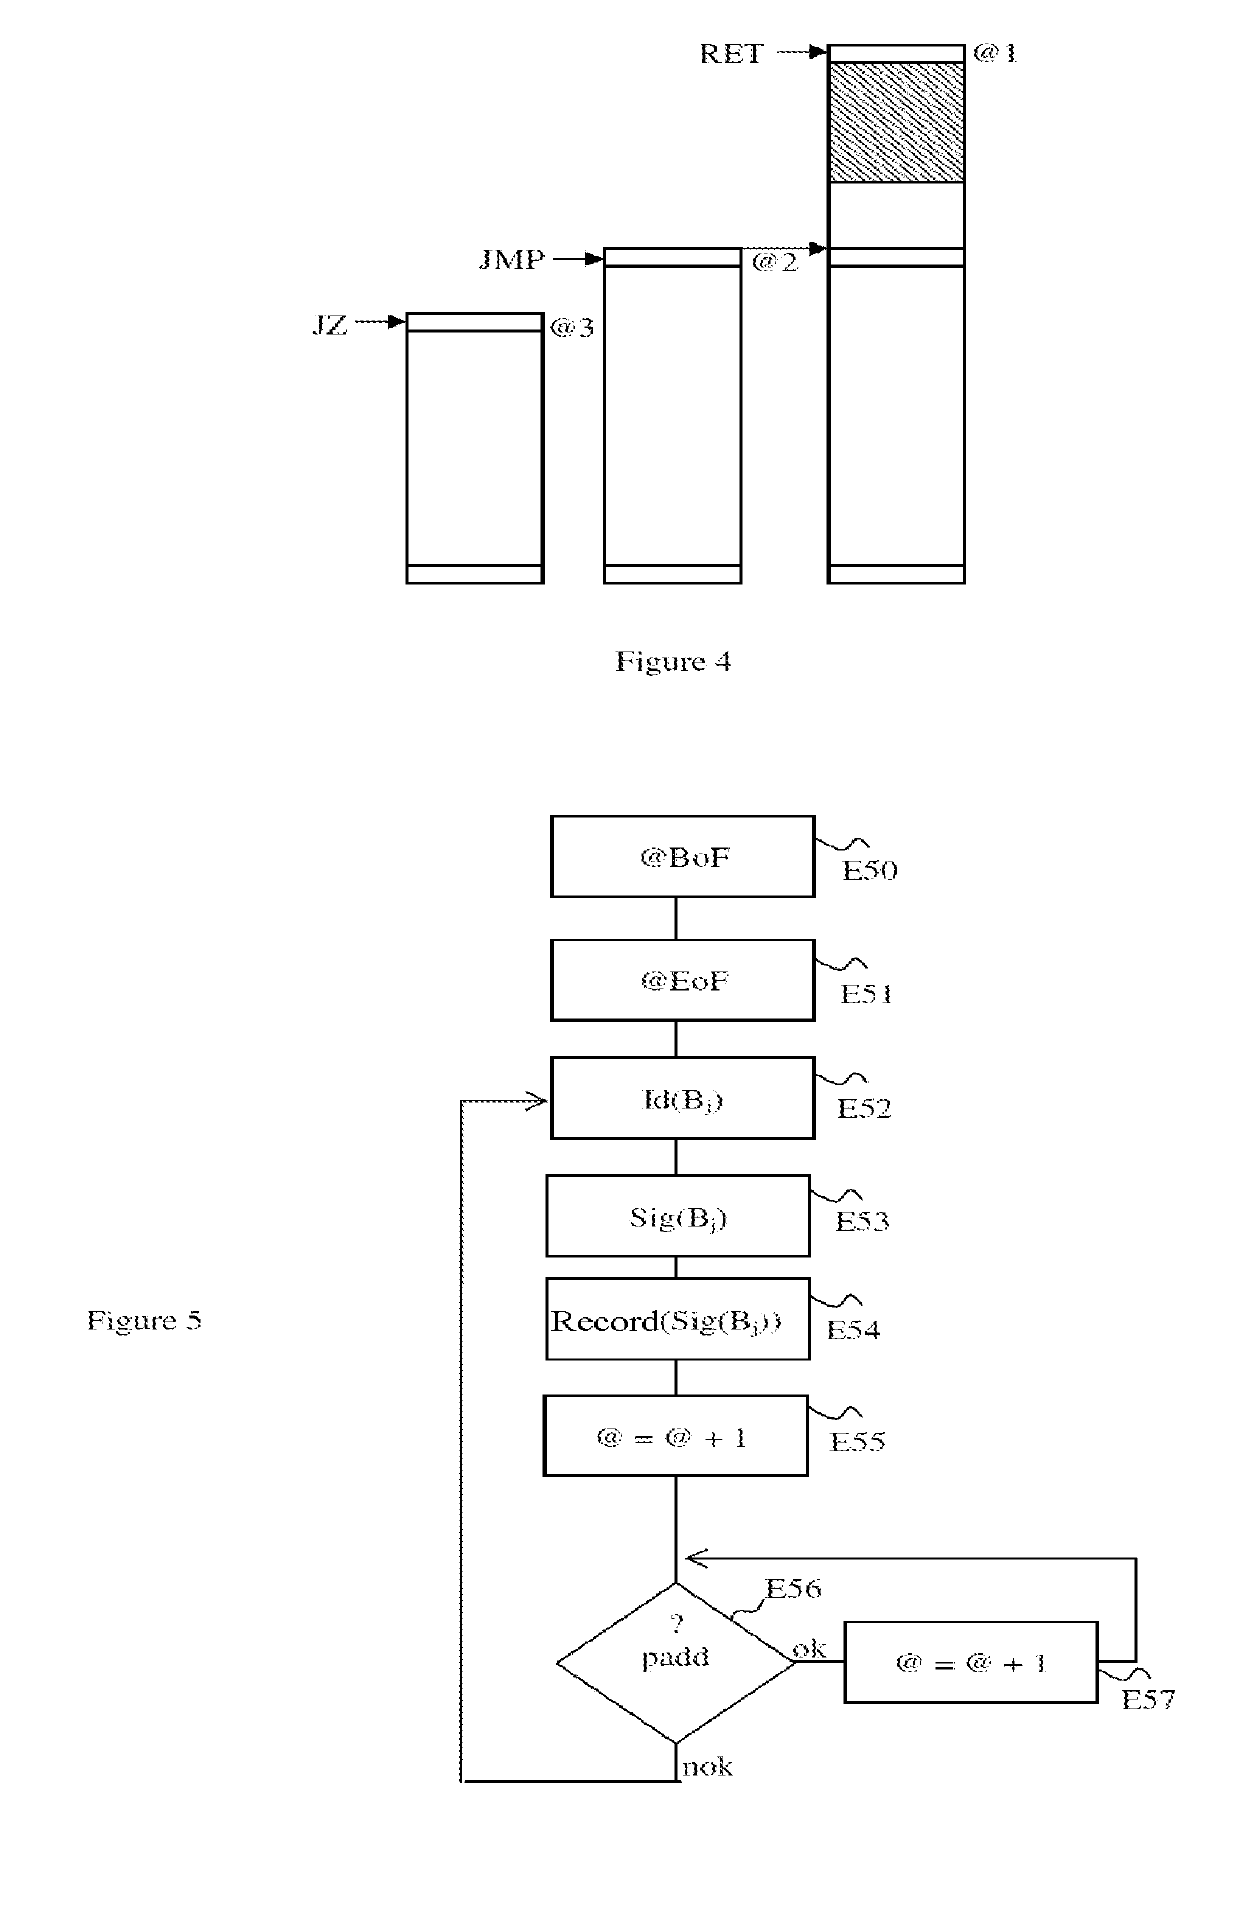 Method for identifying at least one function of an operating system kernel